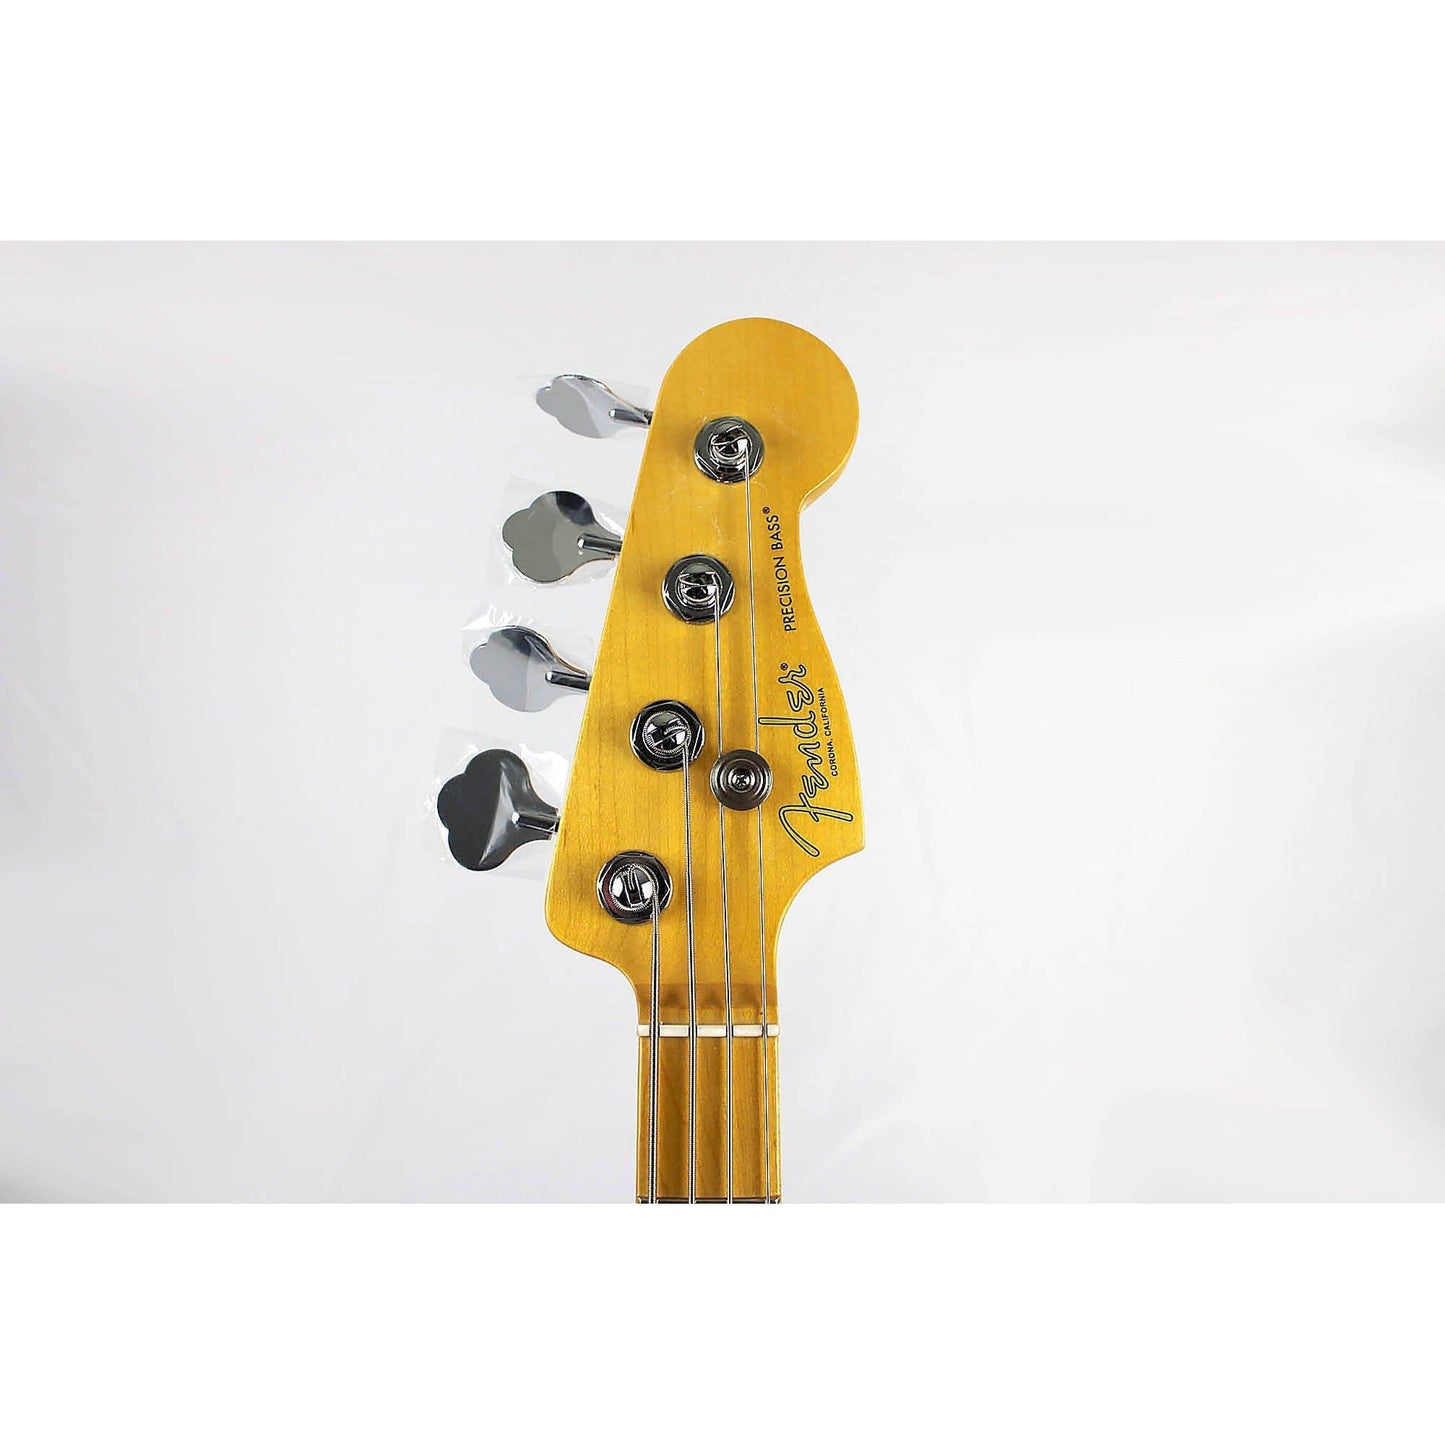 Fender American Professional II Precision Bass - Miami Blue with Maple Fingerboard - Leitz Music-885978657582-0193932719